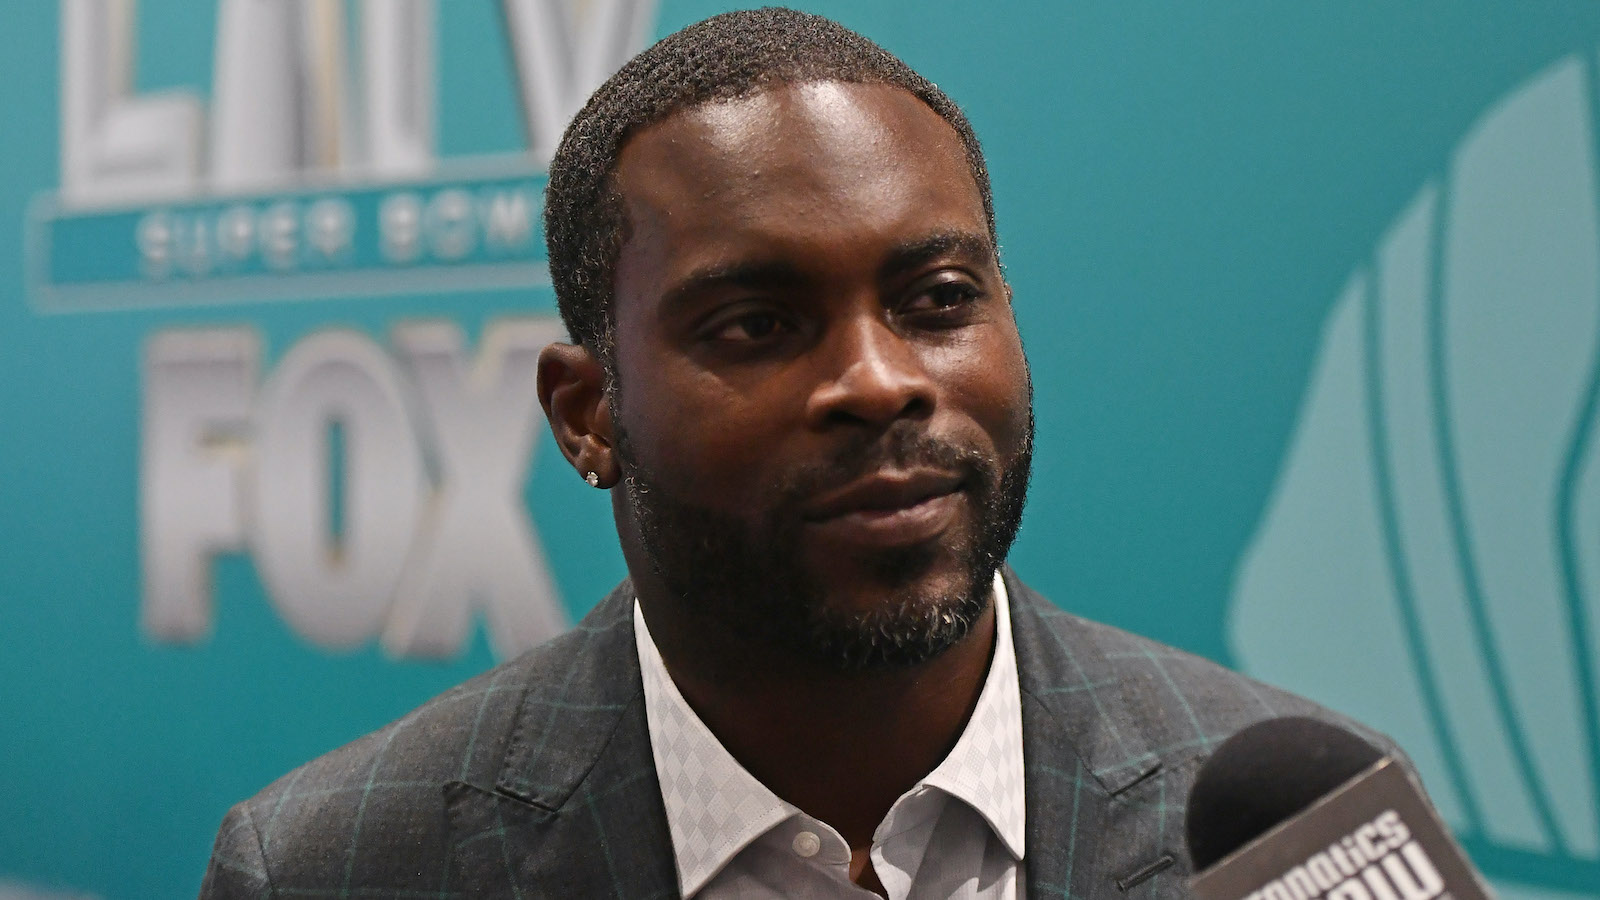 $100 Million, Six-Year Deal For Michael Vick : The Two-Way : NPR